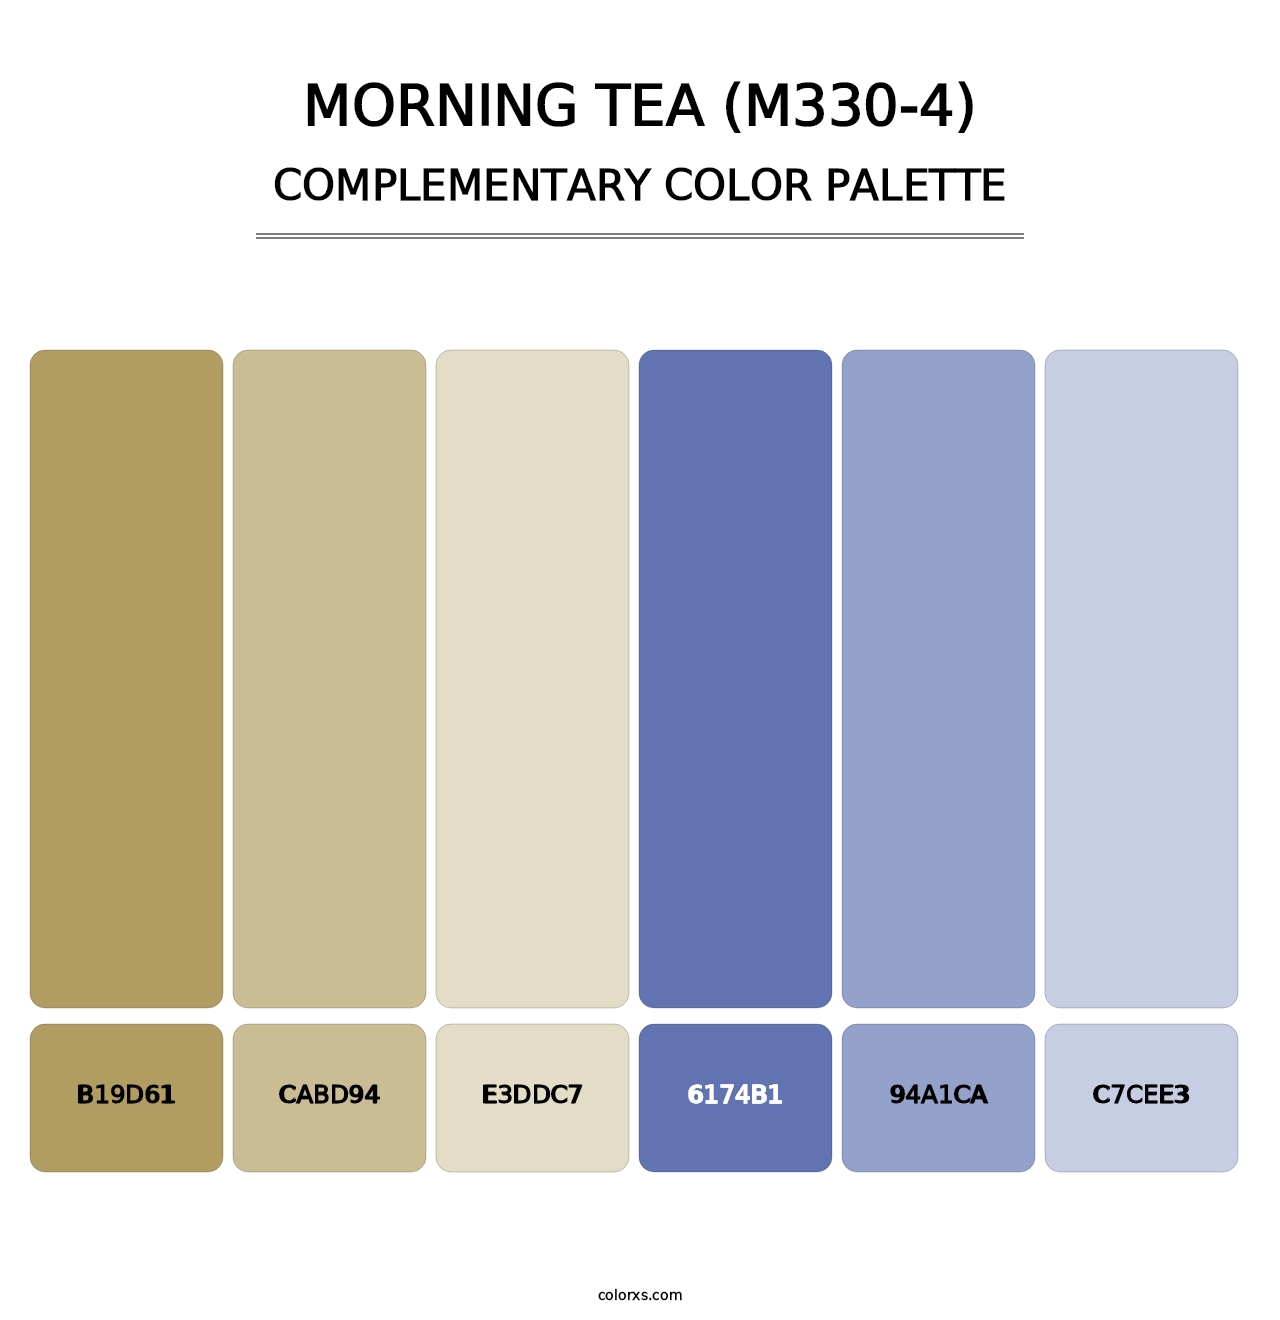 Morning Tea (M330-4) - Complementary Color Palette